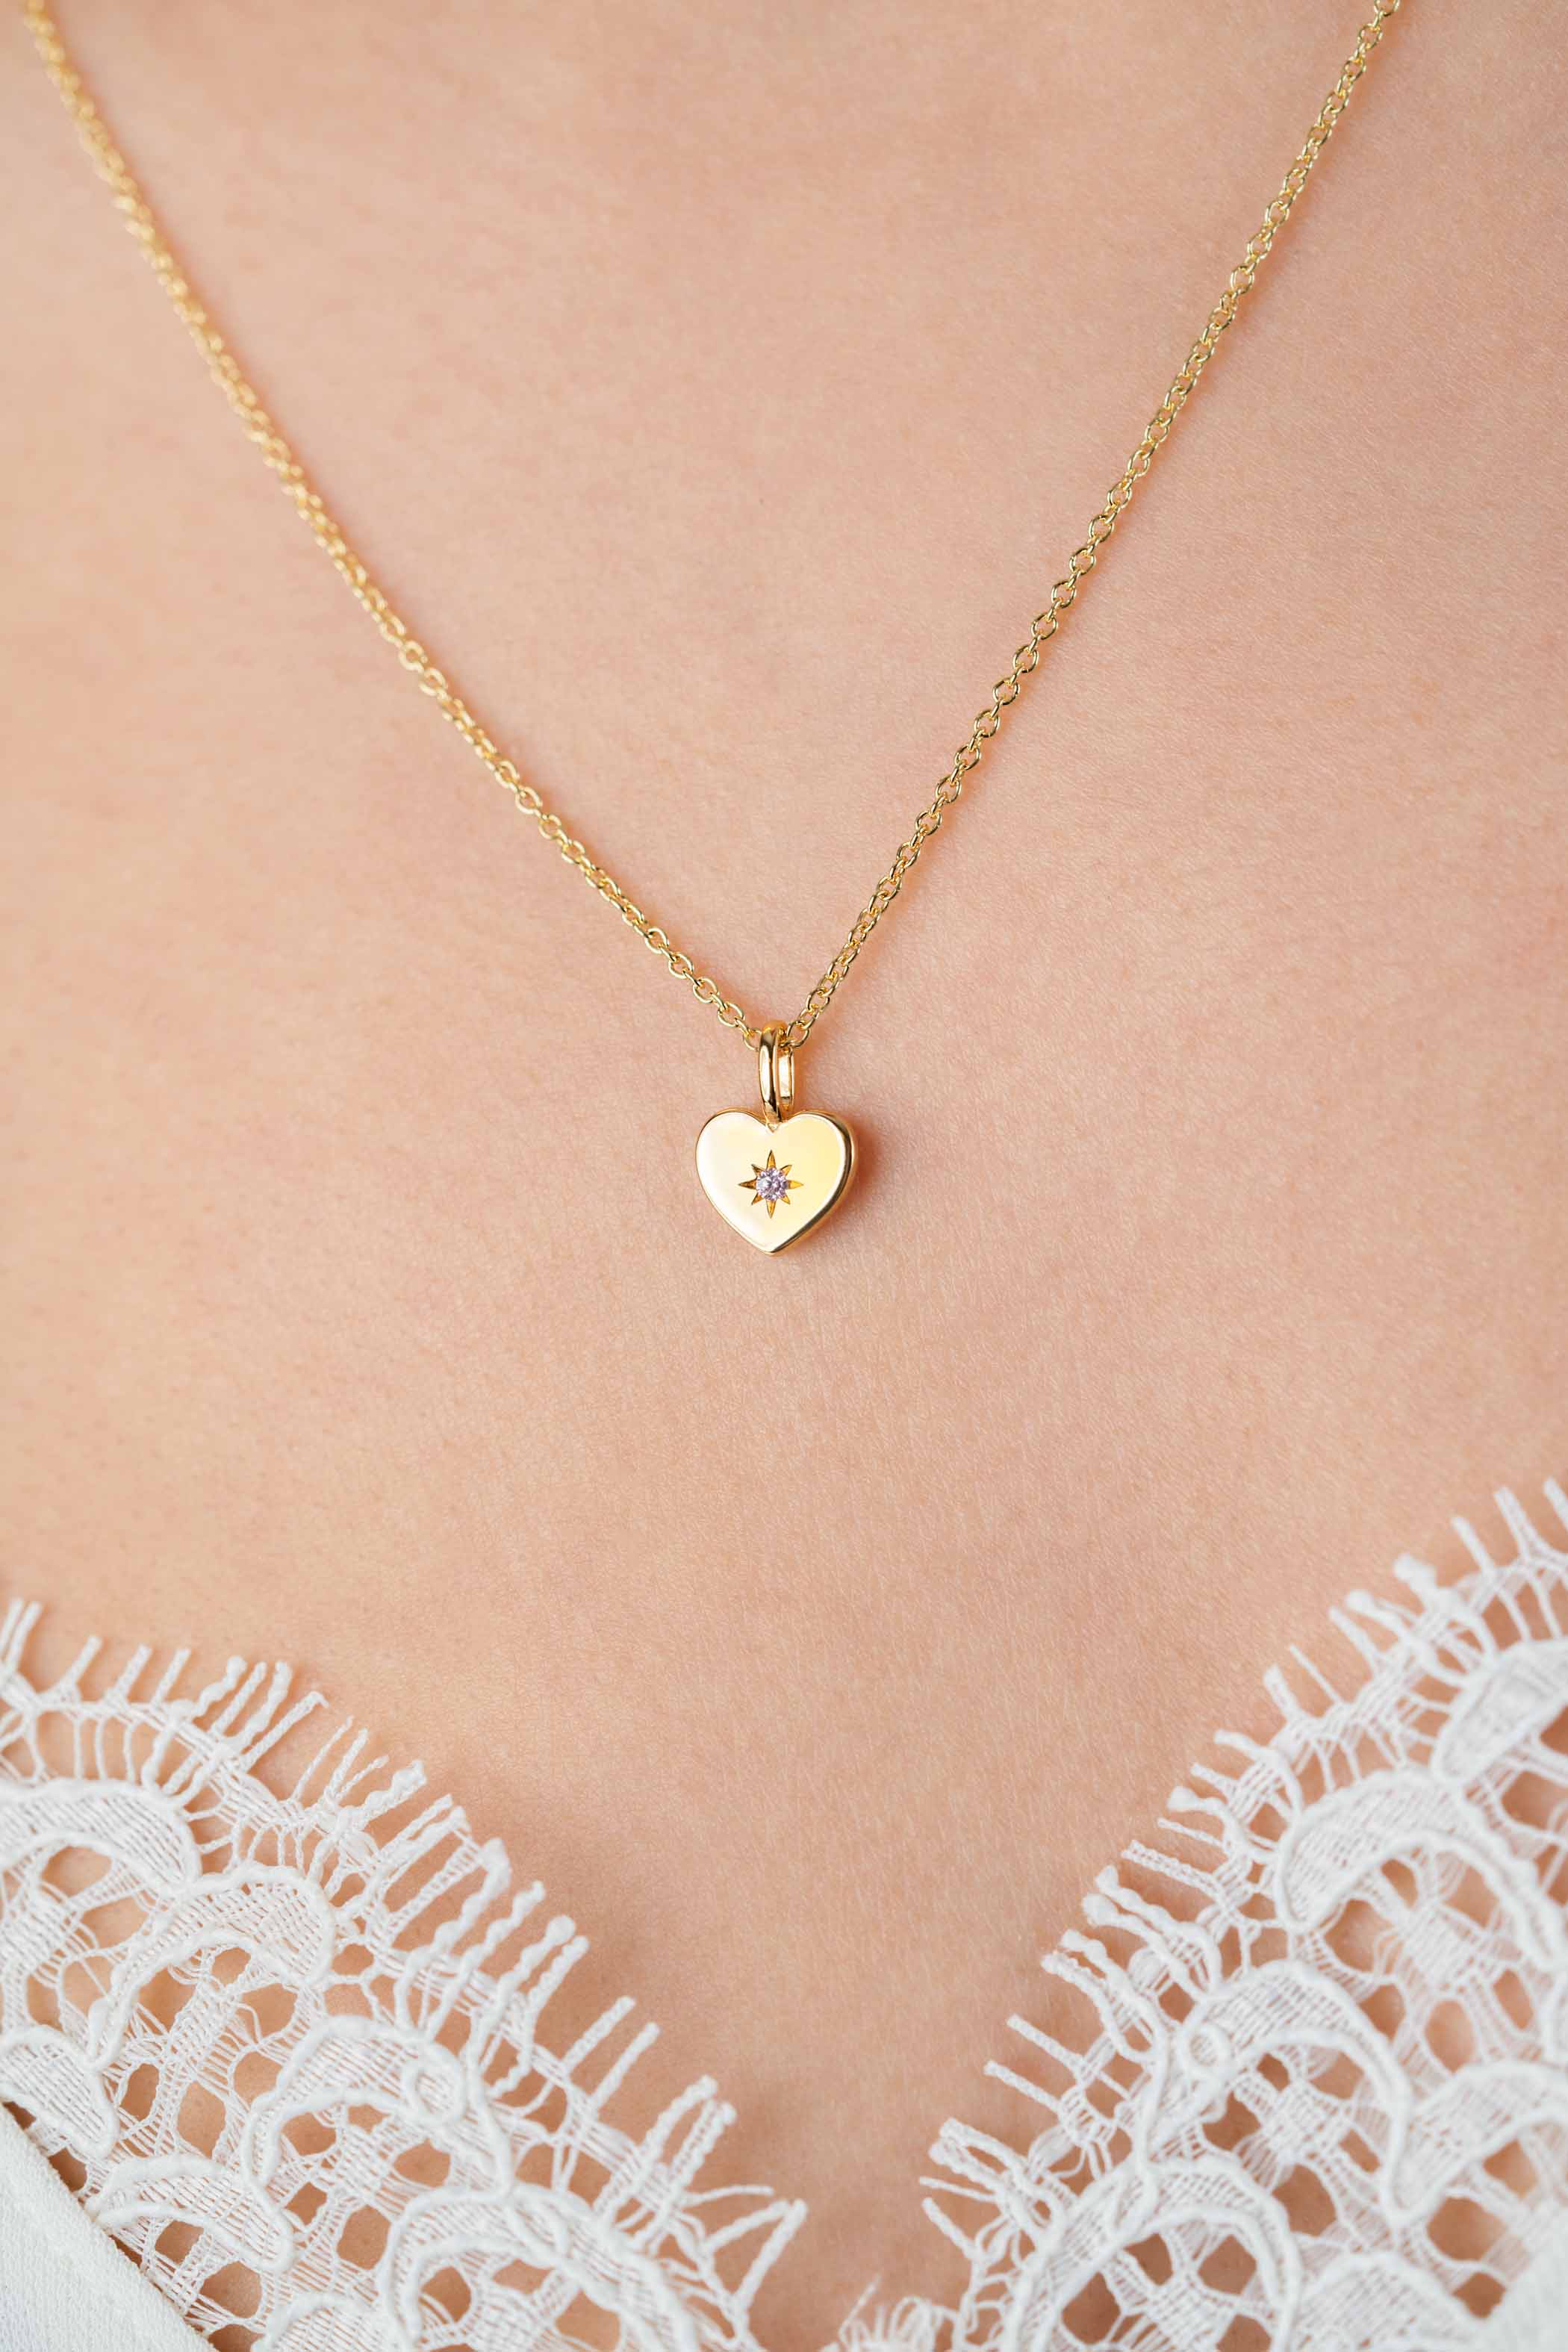 OCTOBER Pendant 12mm Gold Plated Heart Birthstone Pink Quartz Zirconia (excl. necklace)